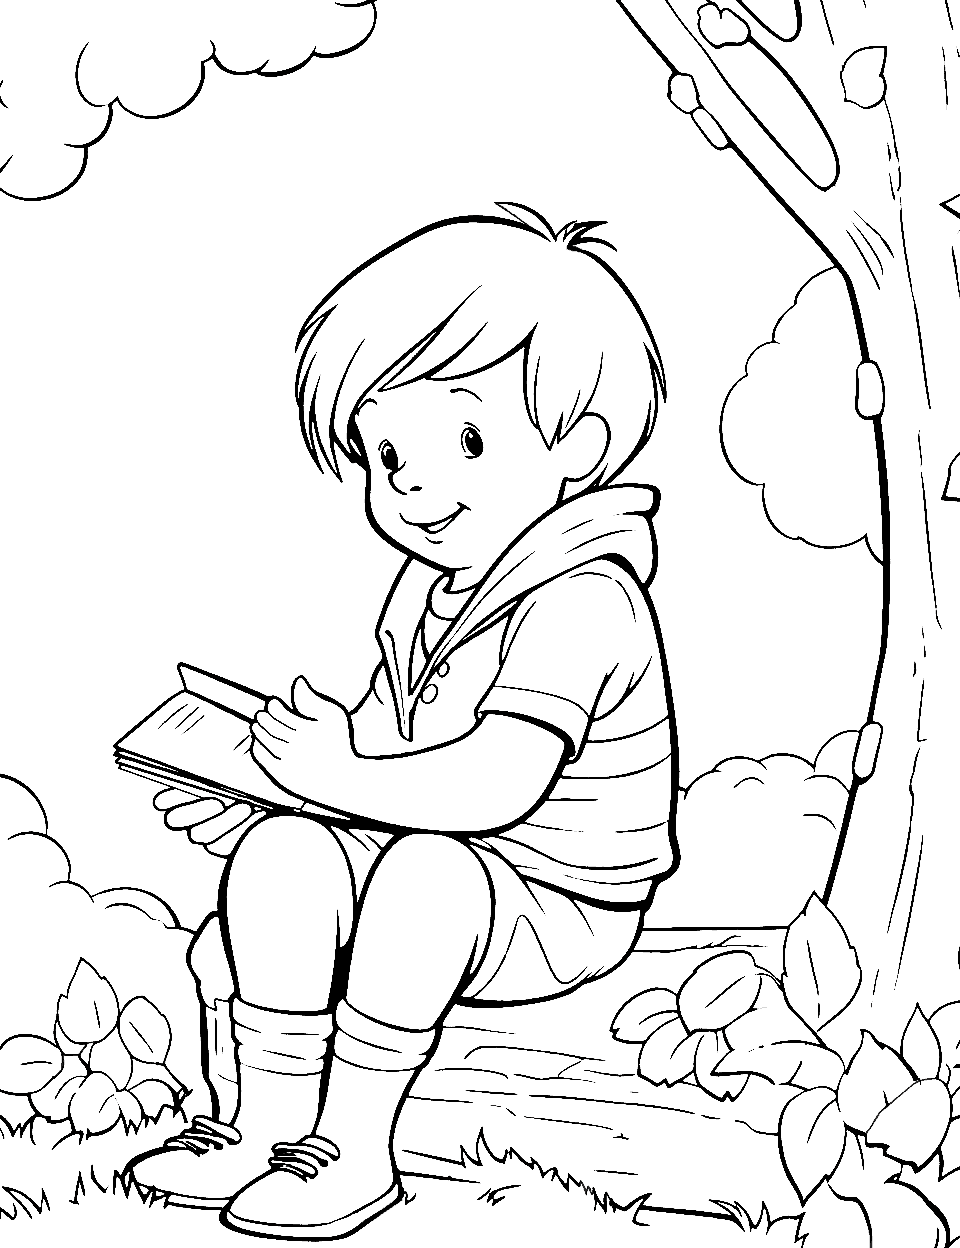 Christopher Robin Reading Coloring Page - Christopher Robin sitting on a log in the forest, engrossed in a large, open book.